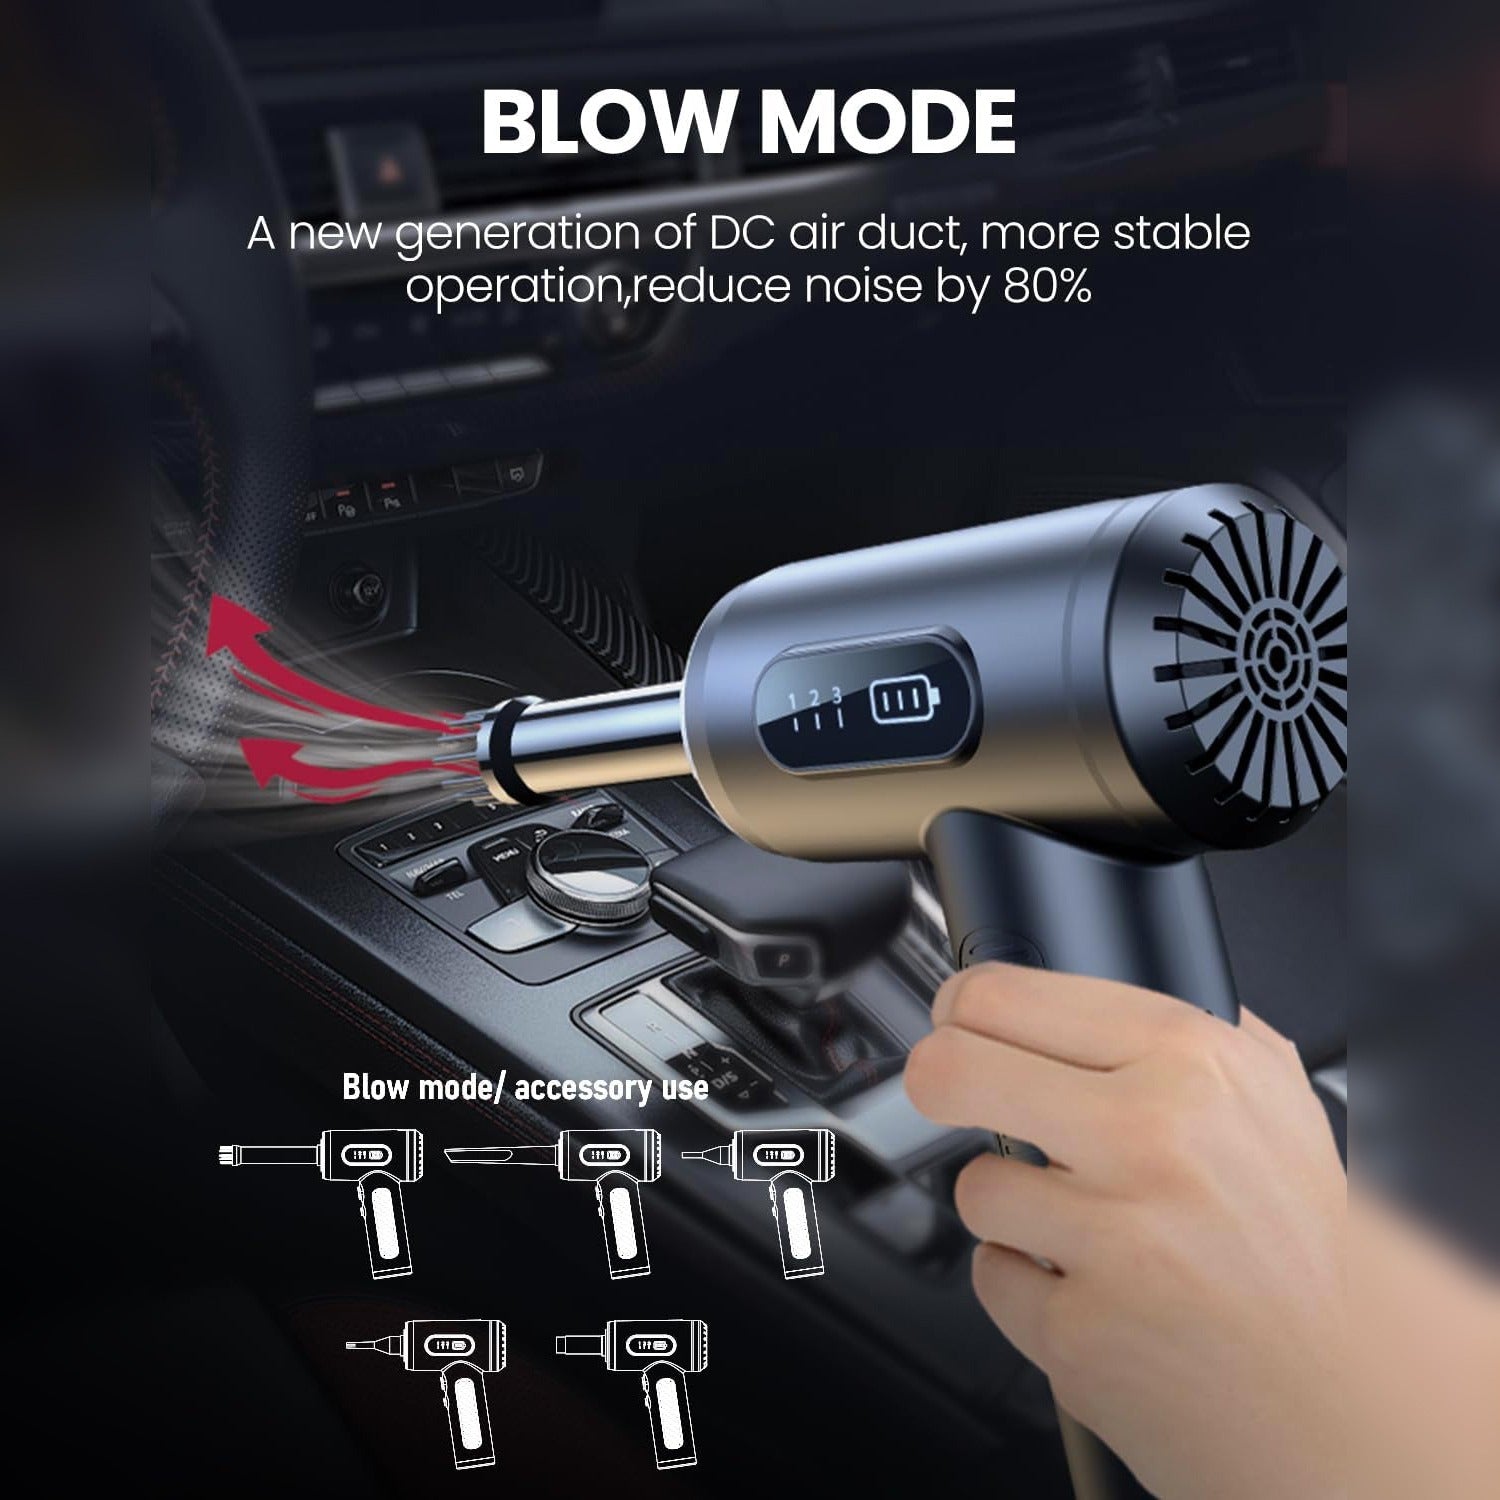 blow mode of 2 in 1 Cordless Air Duster